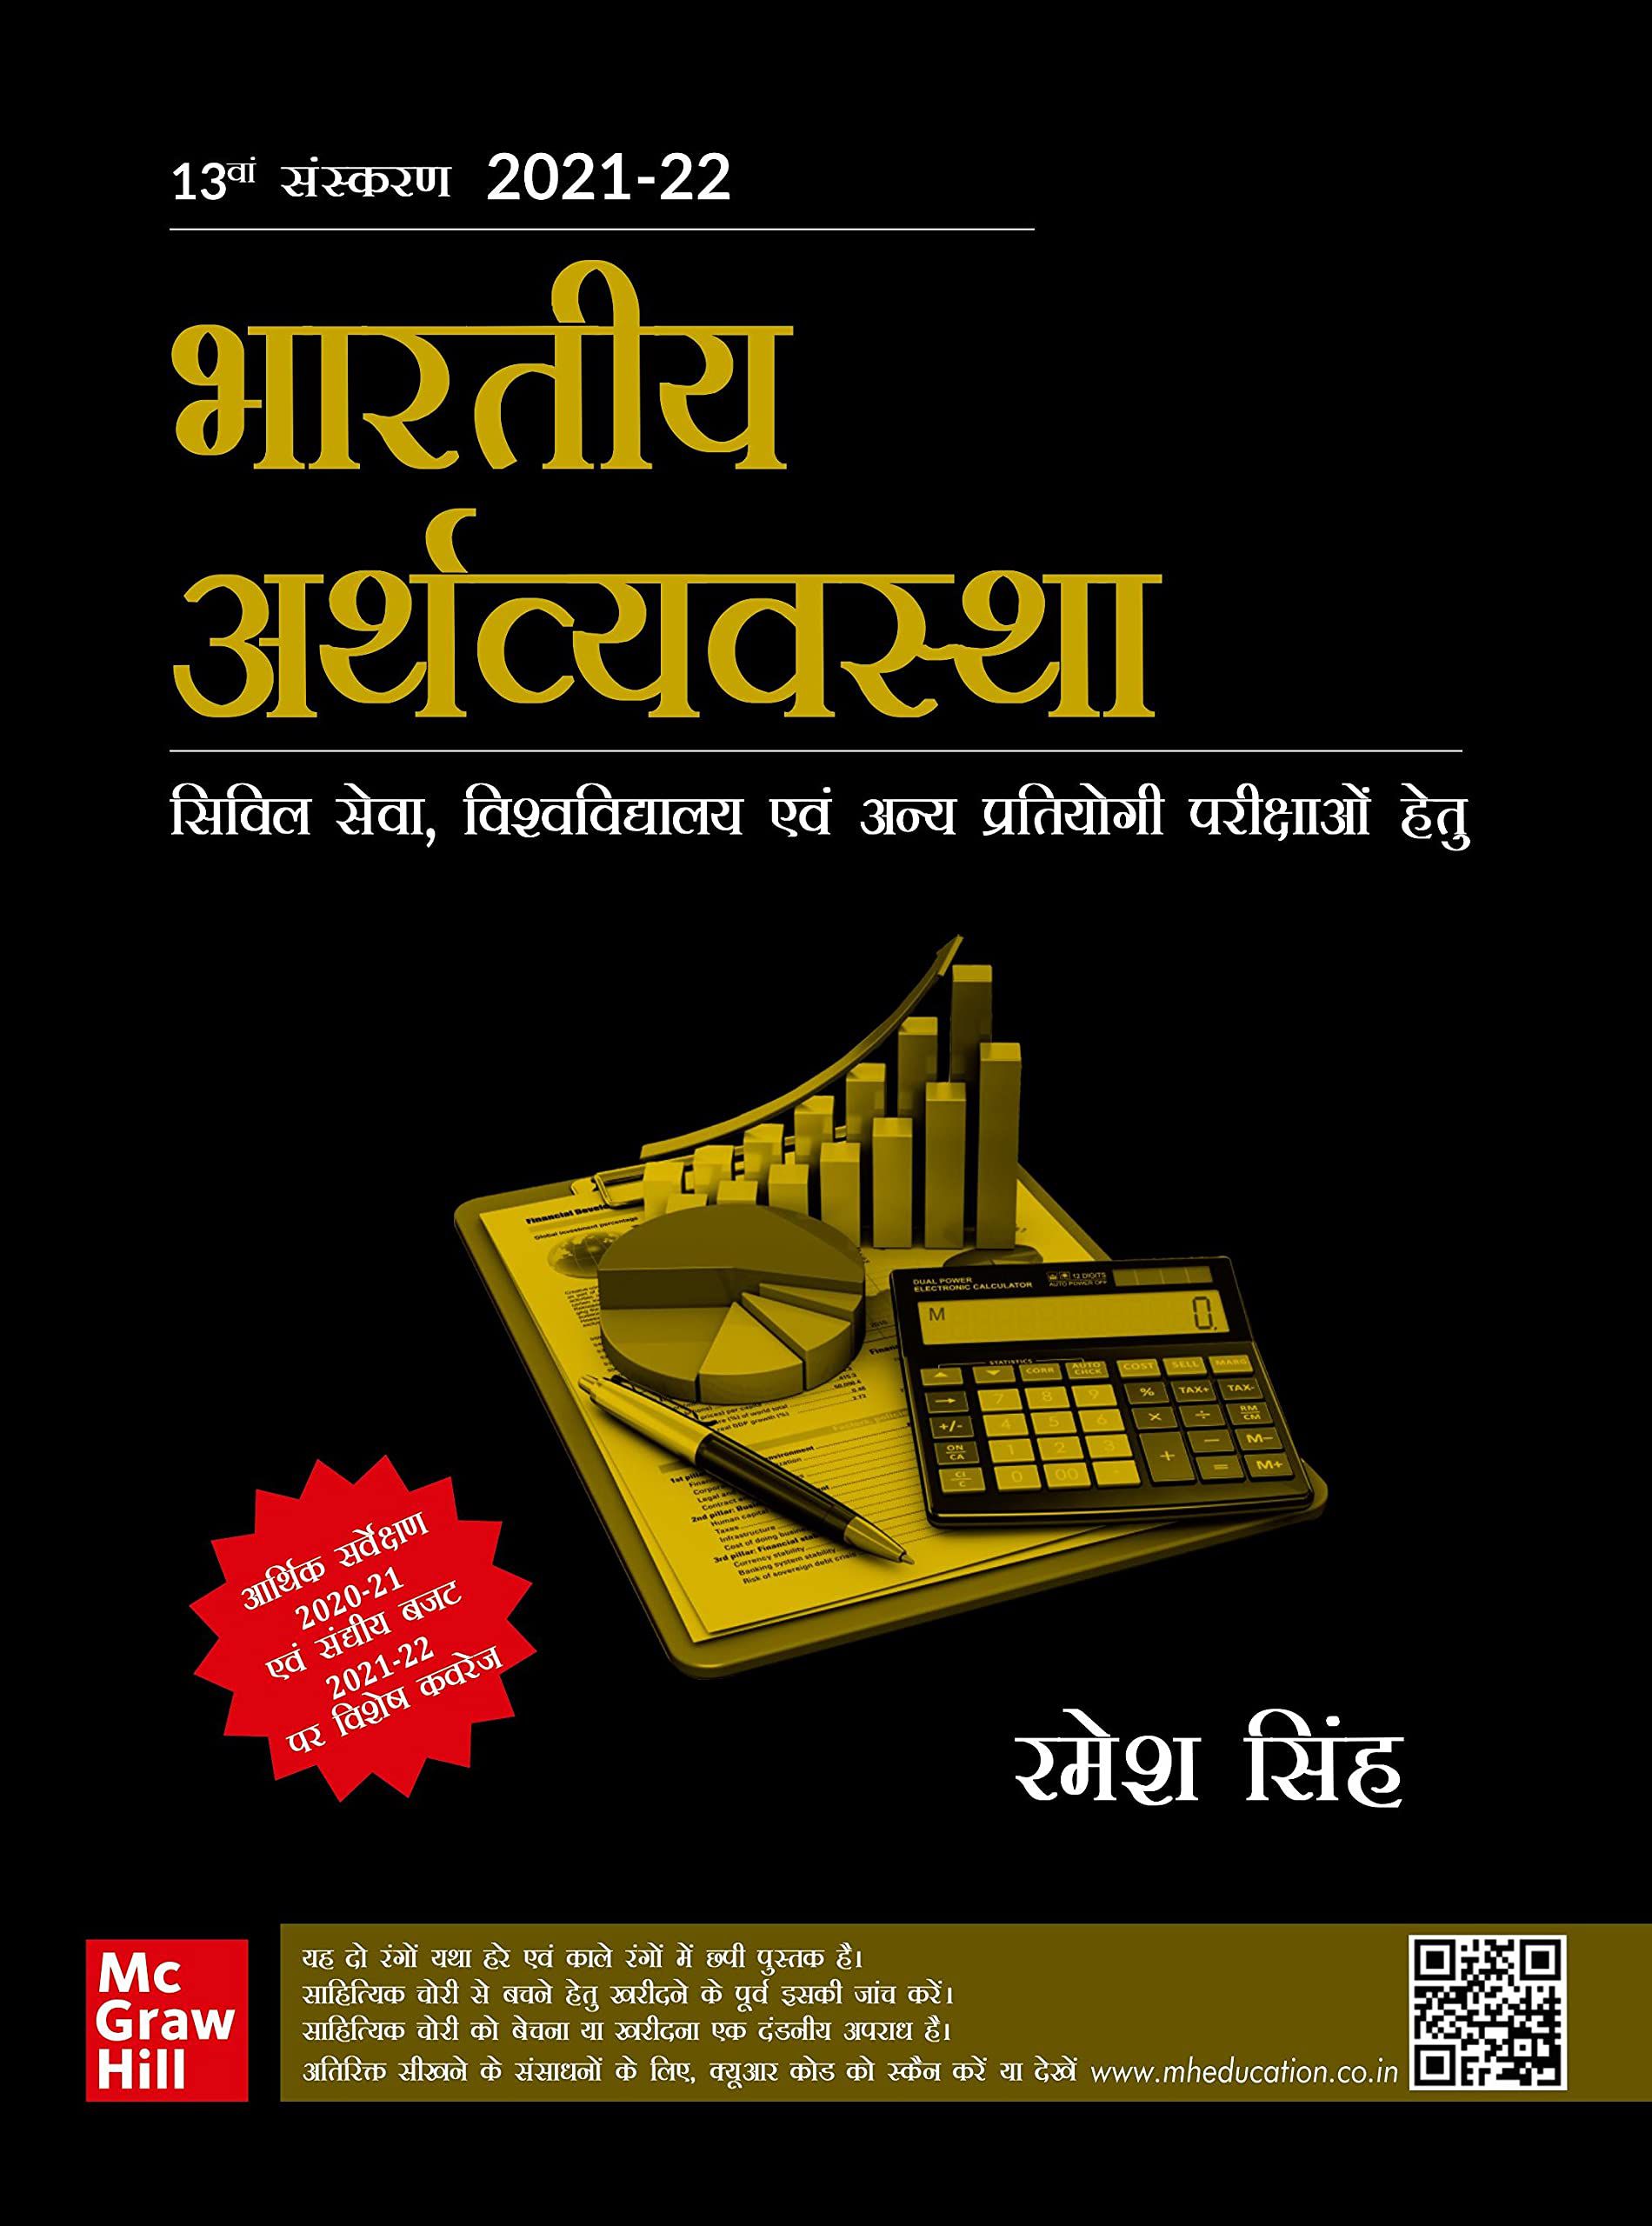     			INDIAN ECONOMY ( Bhartiya Arthvayastha) For Civil Services, Universities and Other Examinations - Hindi 13th Edition Paperback - 5 May 2021 by RAMESH SINGH